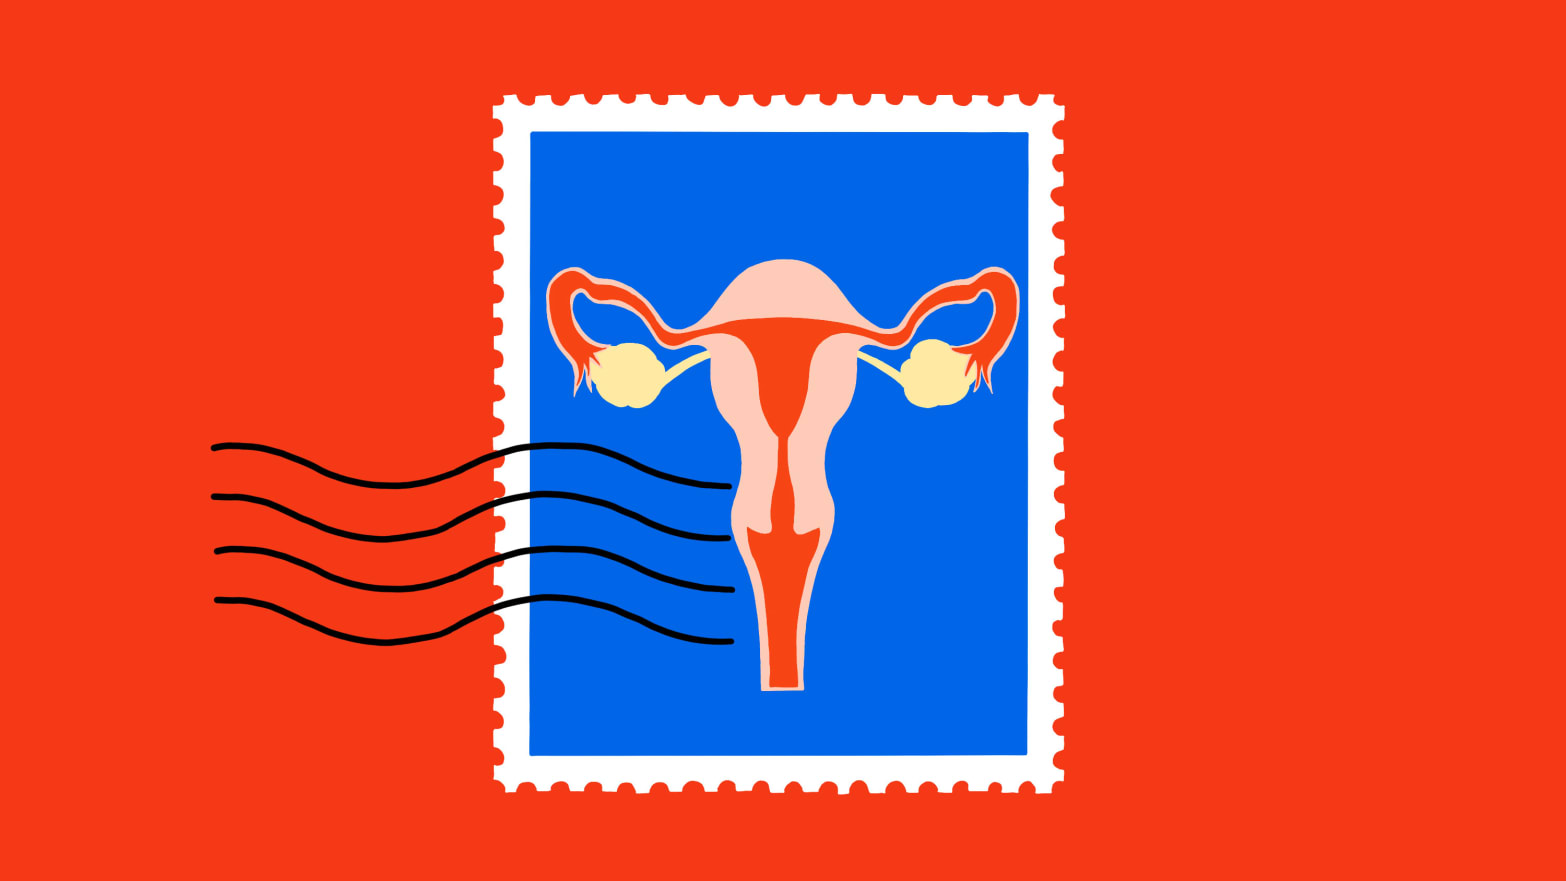 Illustration of a postage stamp with a uterus on it.